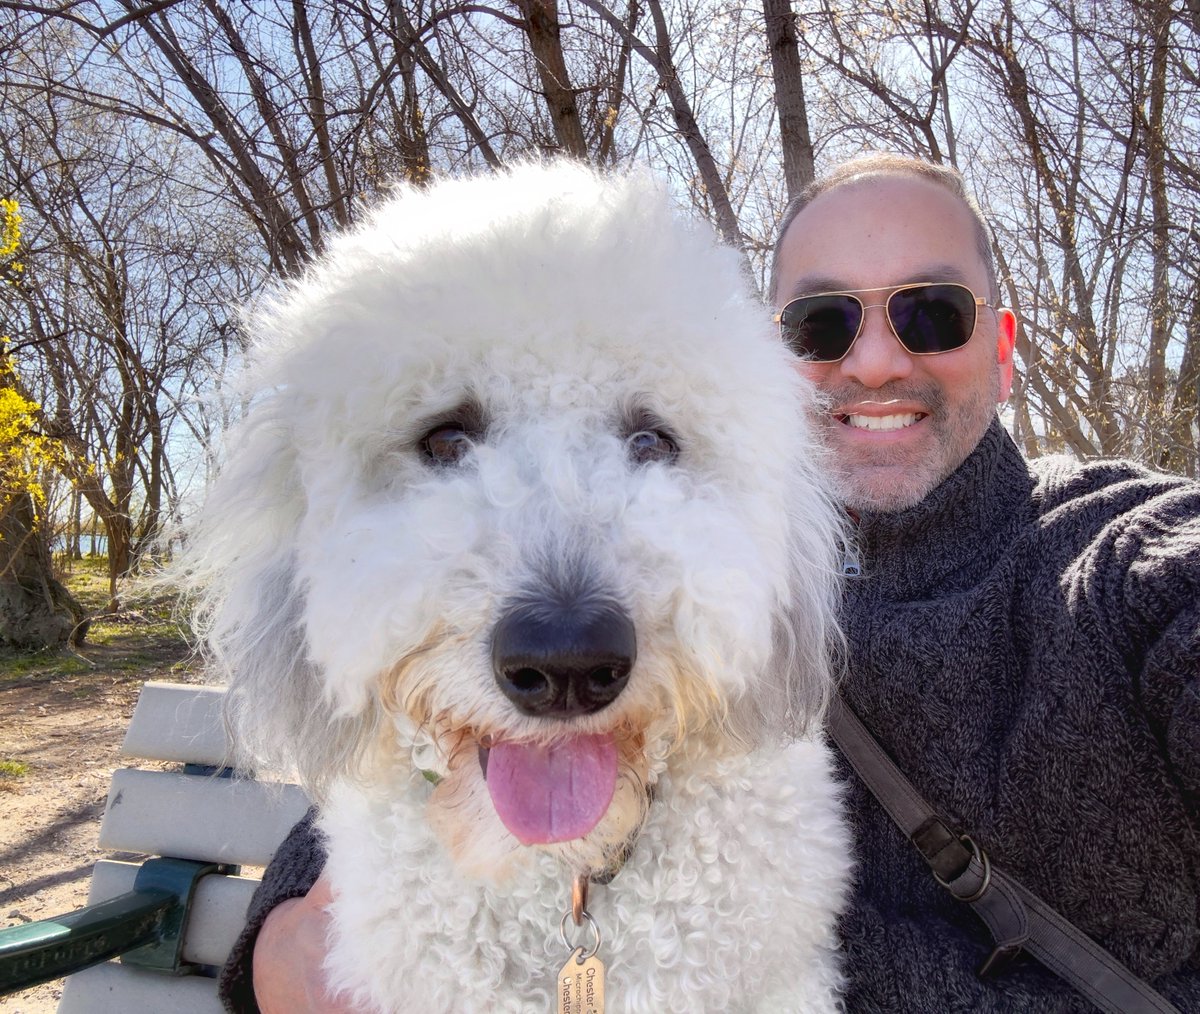 Somehow he manages to look gigantic selfies. It’s still a little cool here in Toronto, but the bright sunshine makes up for it! We’re out for a late afternoon romp through the woods. #DailyChester #sheepadoodle